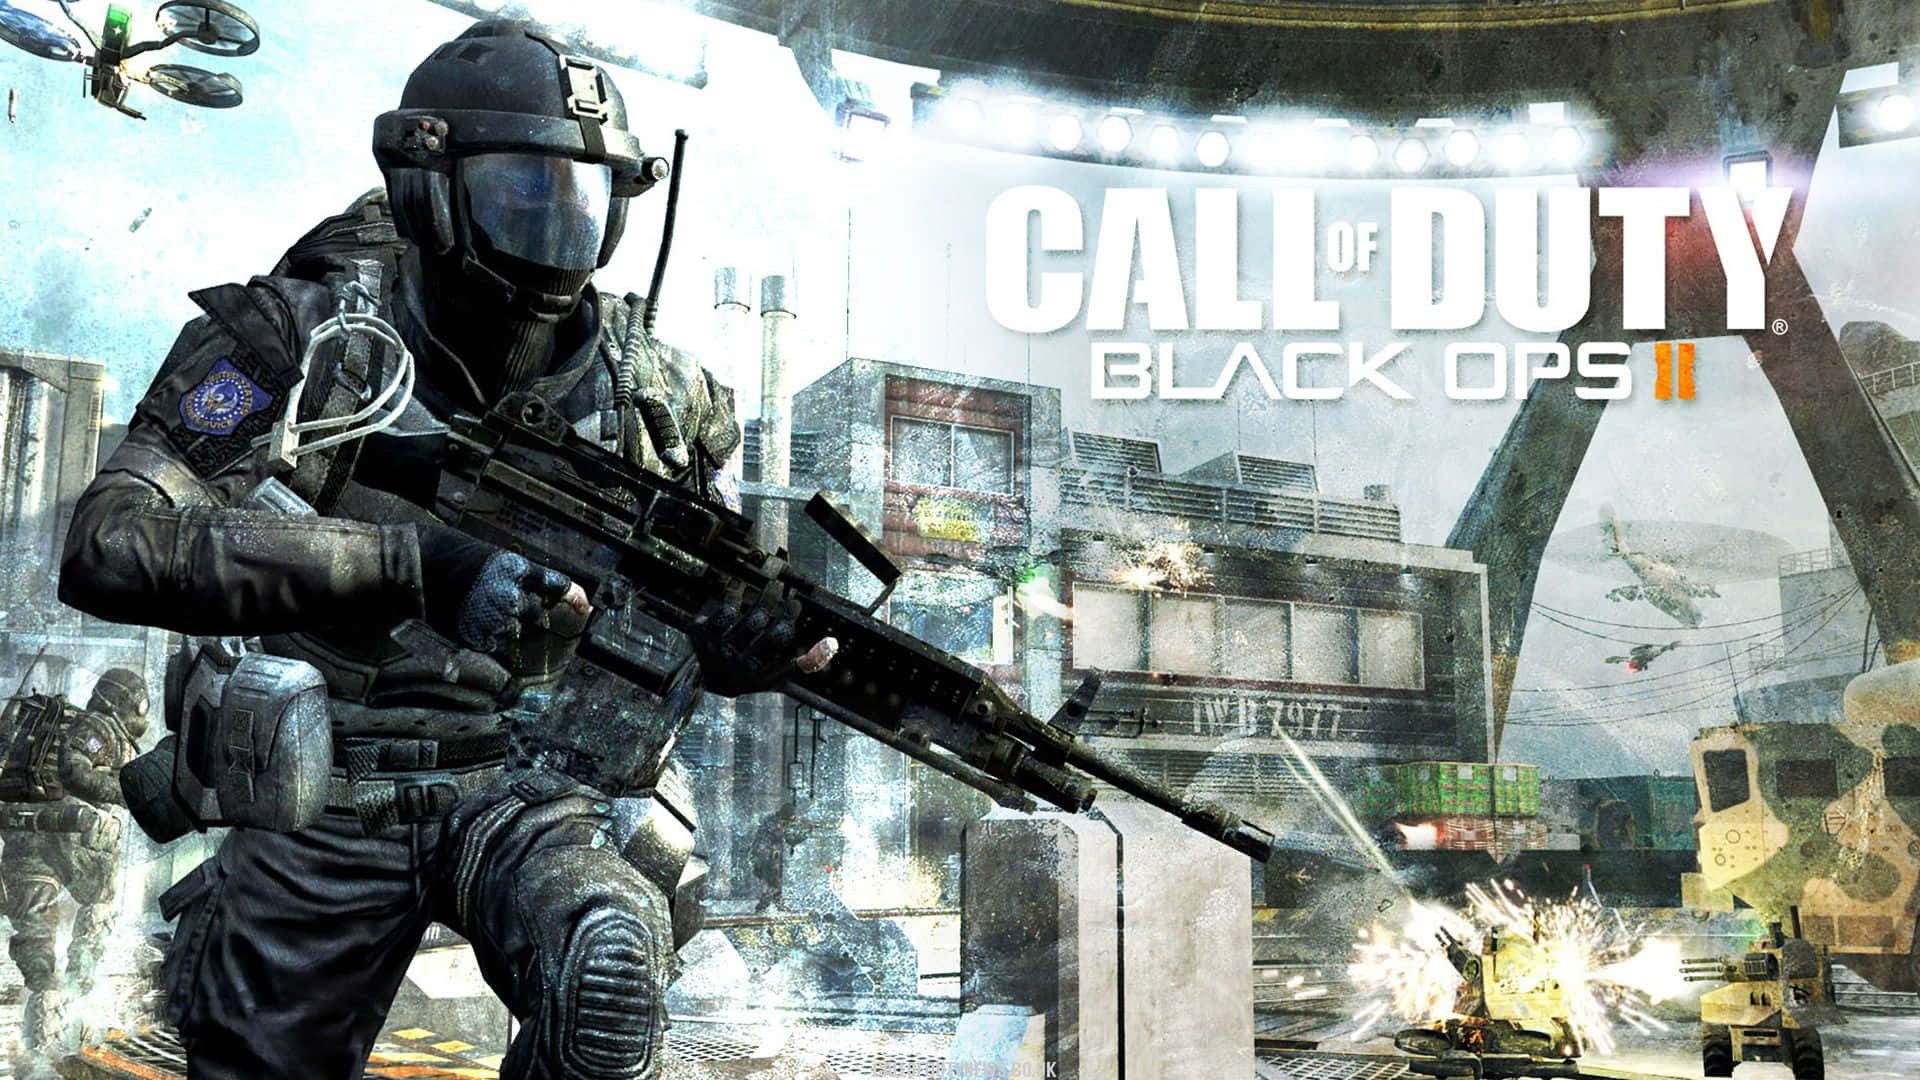 Intense First-Person Shooter Action in Call of Duty Wallpaper